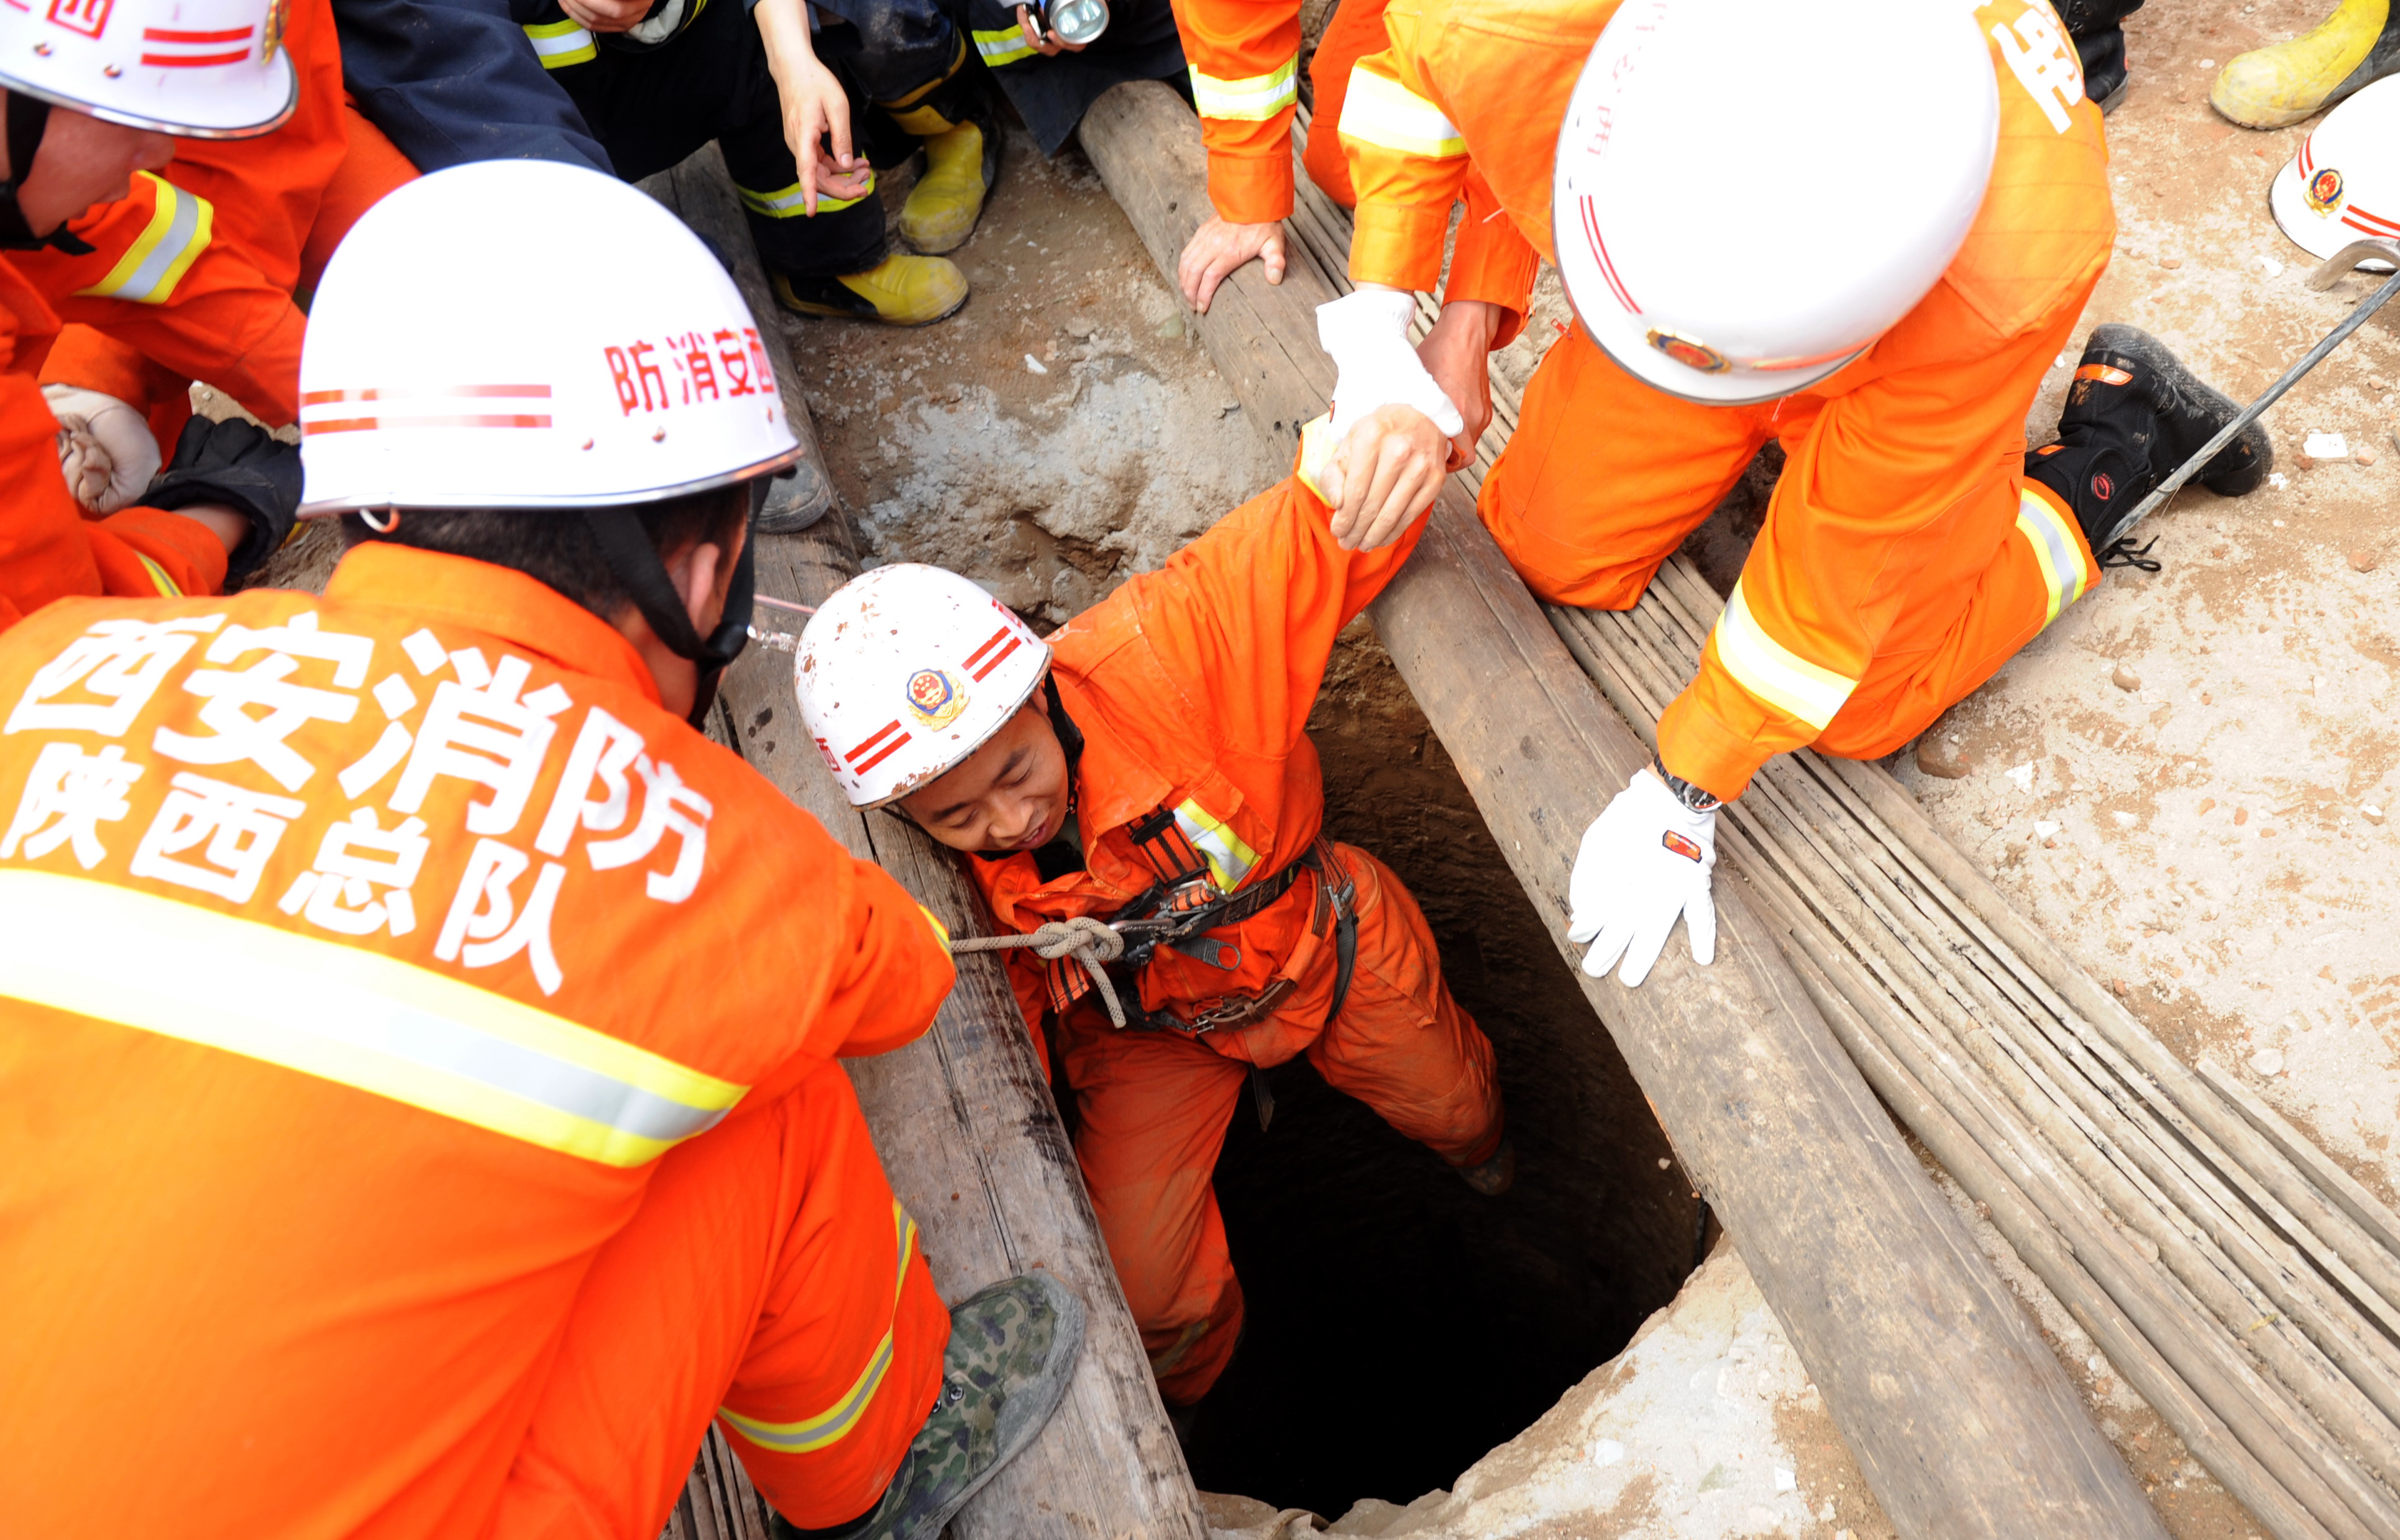 Boy rescued after 20 hrs in well regains conscious